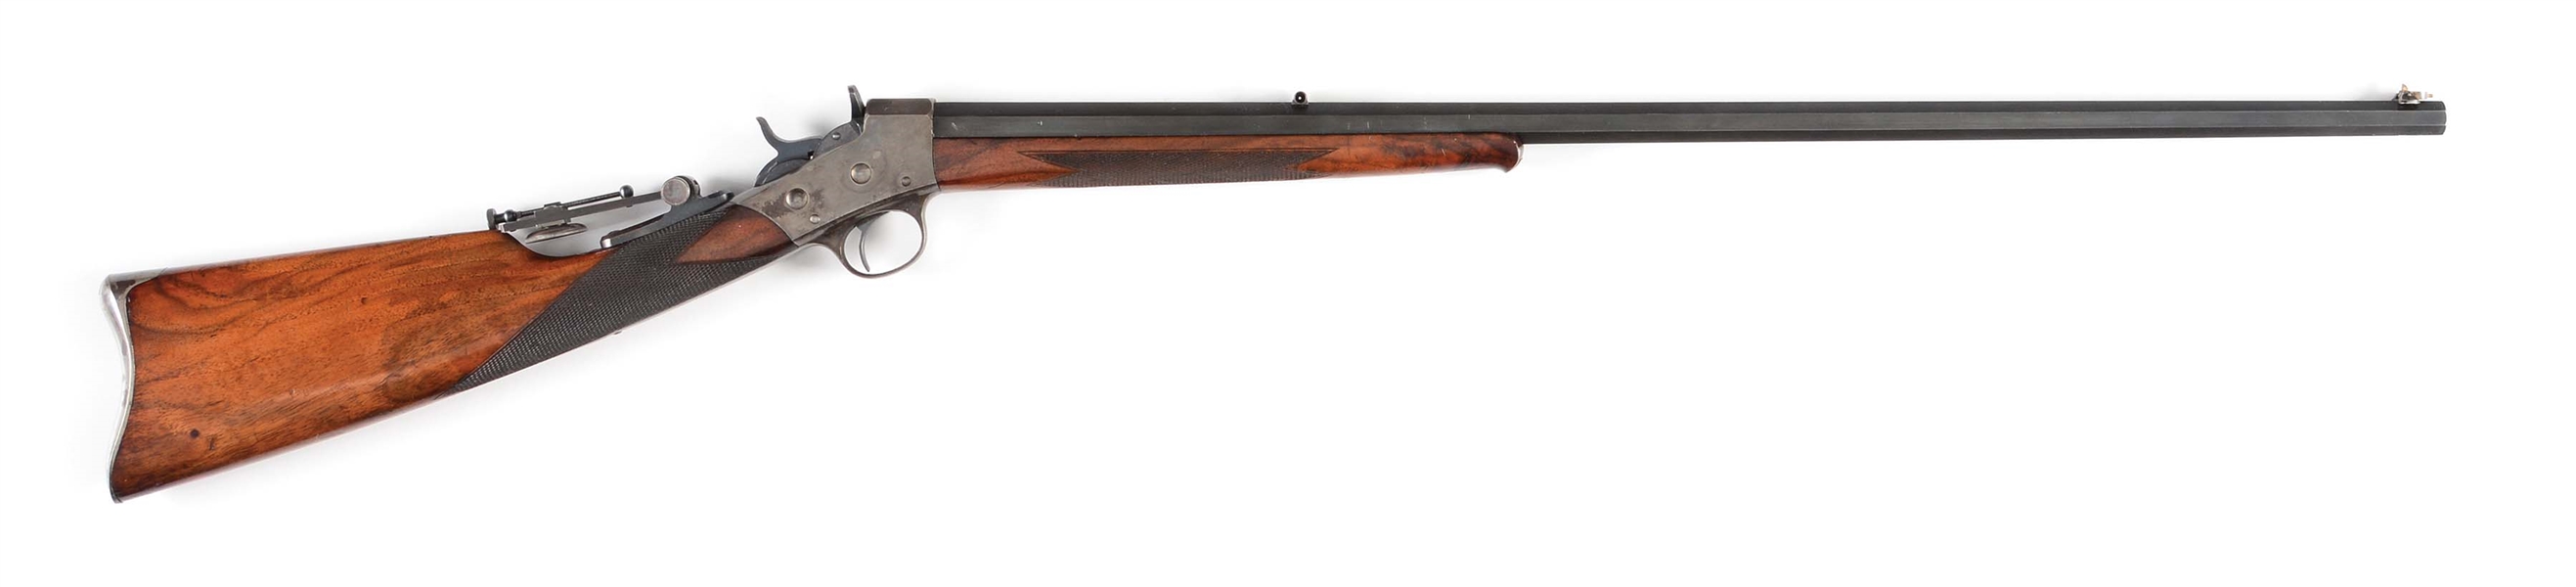 (A) REMINGTON NUMBER 2 ROLLING BLOCK DELUXE TARGET RIFLE.